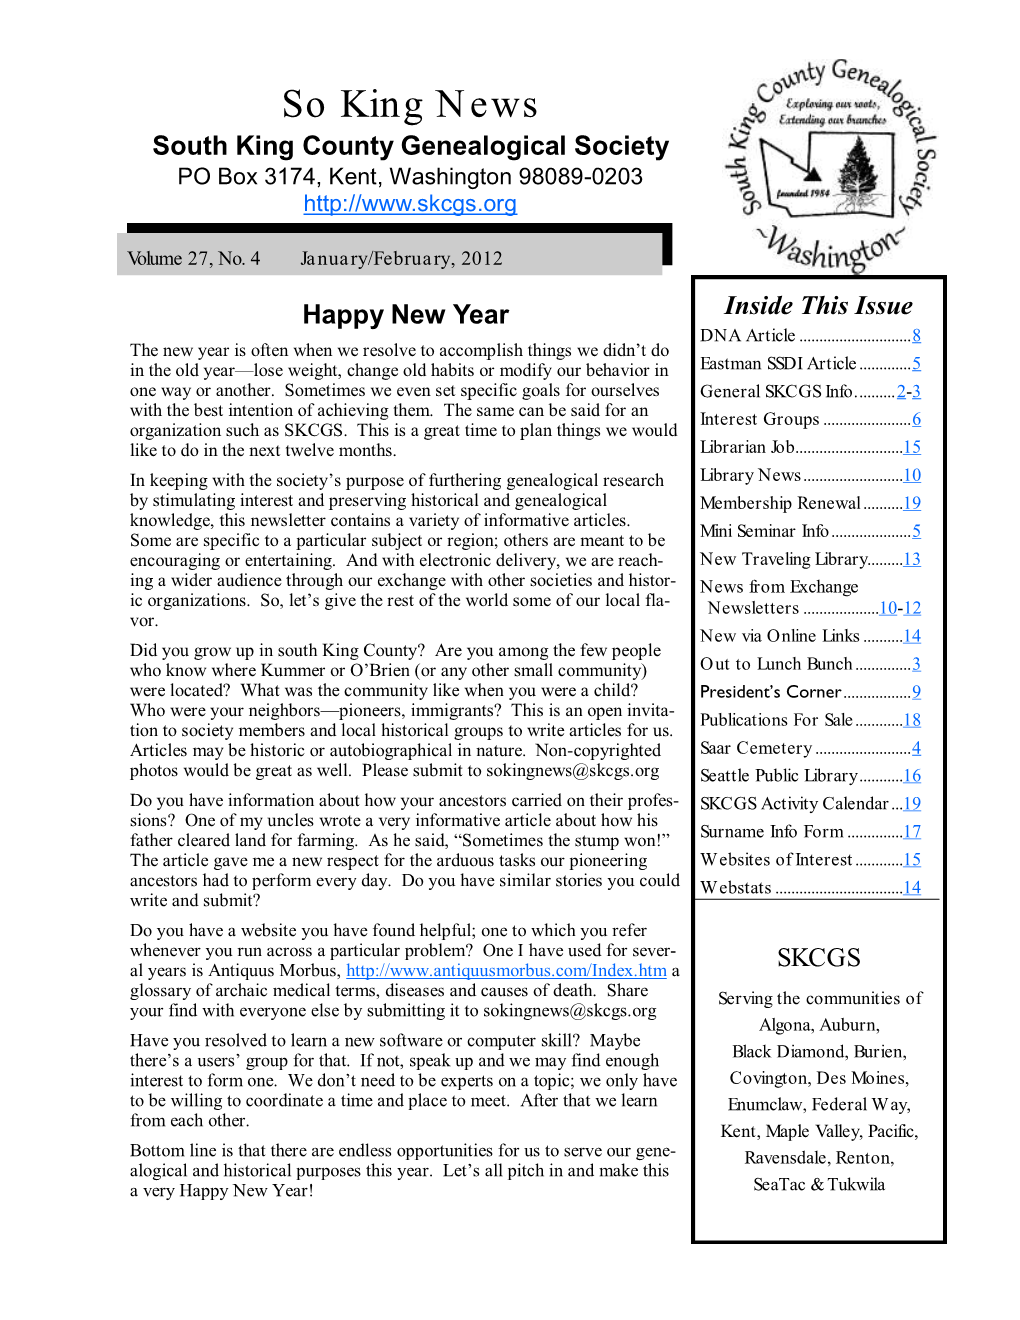 South King County Genealogical Society Newsletter